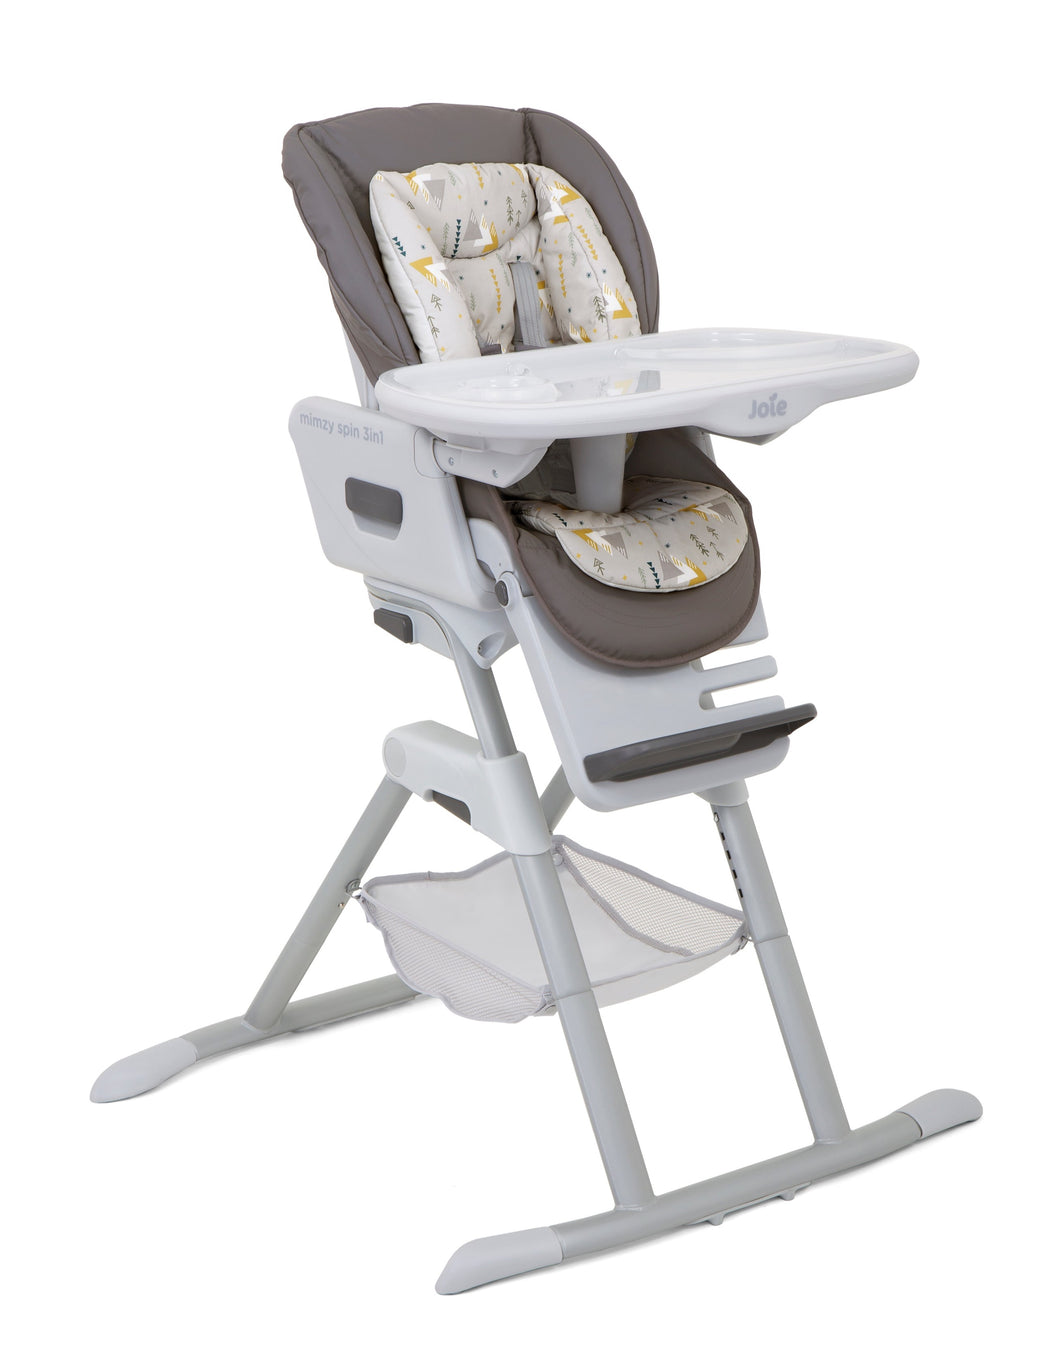 MIMZY SPIN 3IN1 HIGHCHAIR